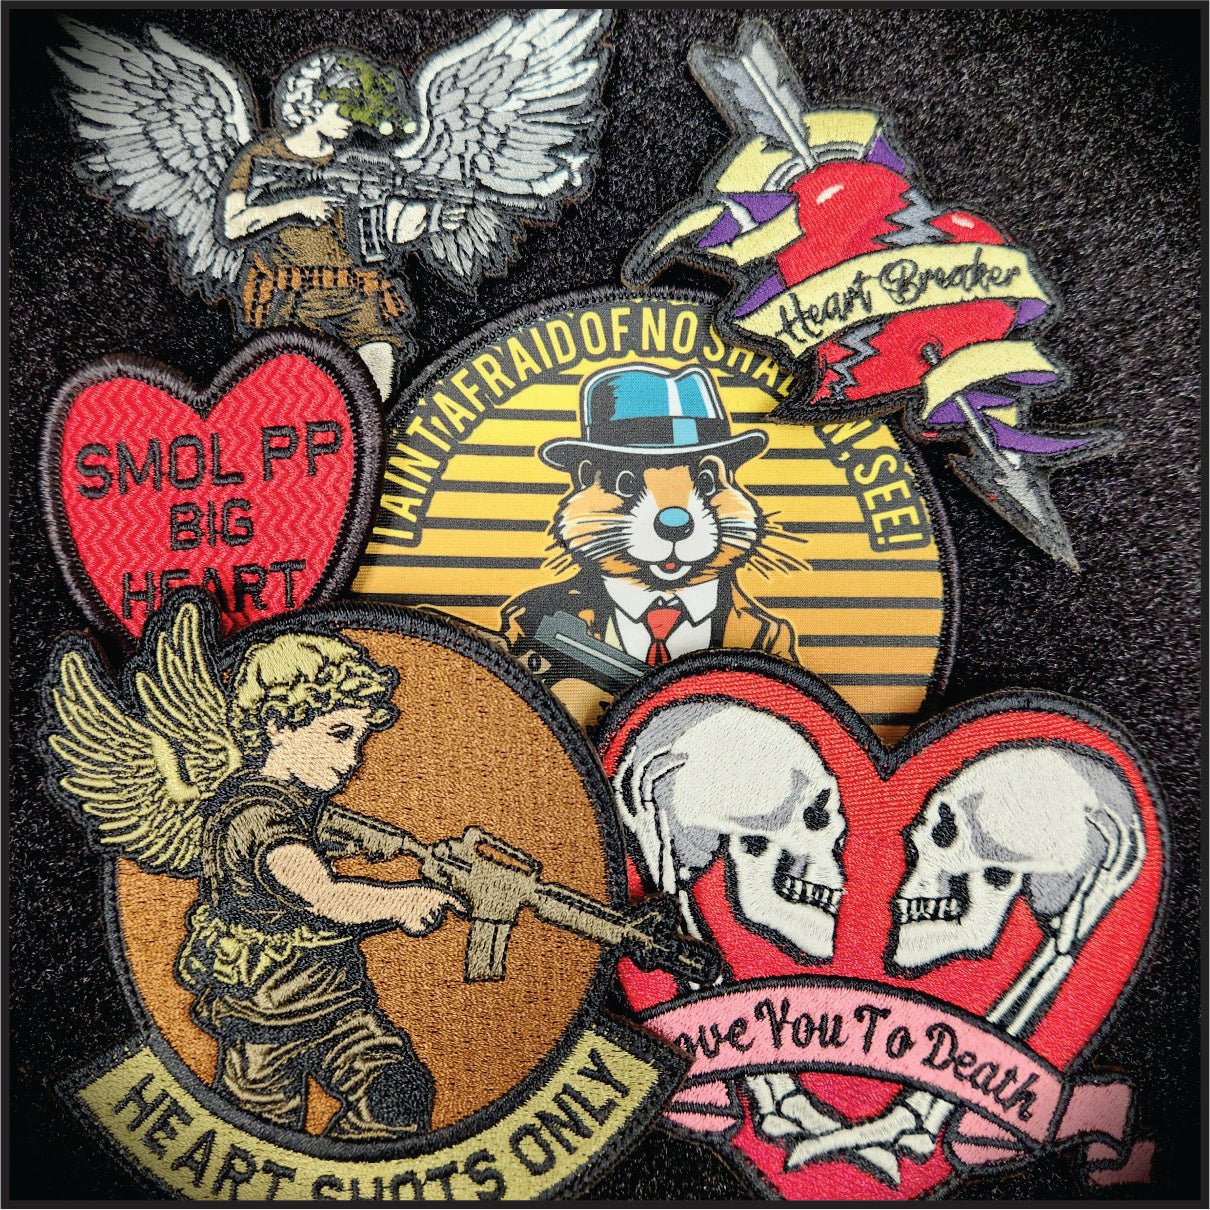 Love Hurts Collection Patch Bundle Pack - Get all Six of our amazing Valentine's Collection designs! BONUS FREE STICKER SET